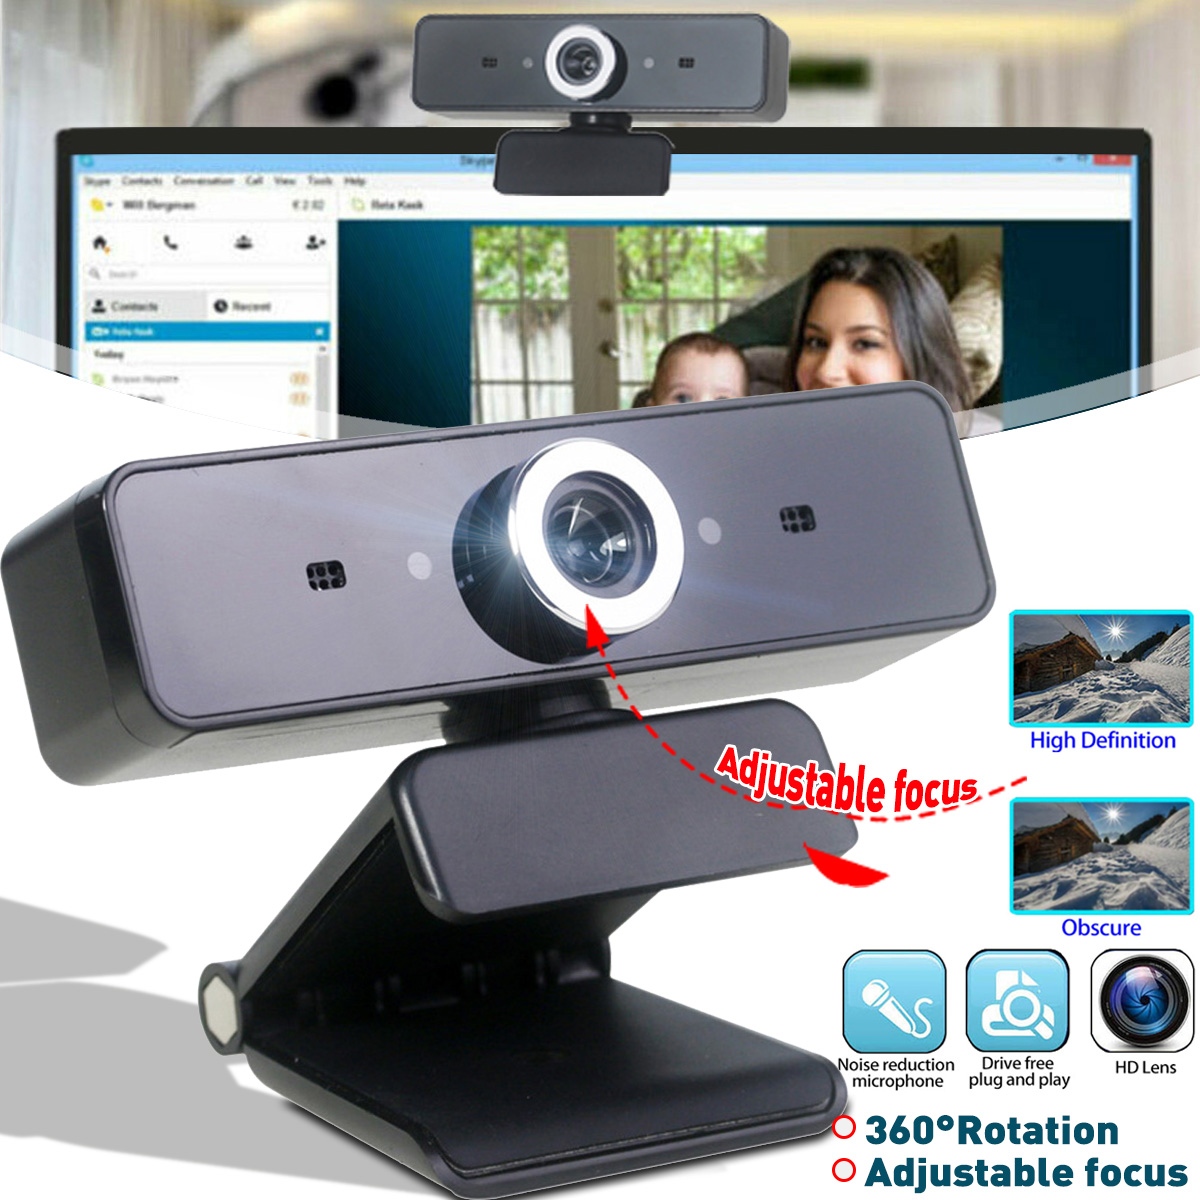 Avanc-HD-720P-USB-Webcam-with-Microphone-for-PC-Laptop-1681643-1